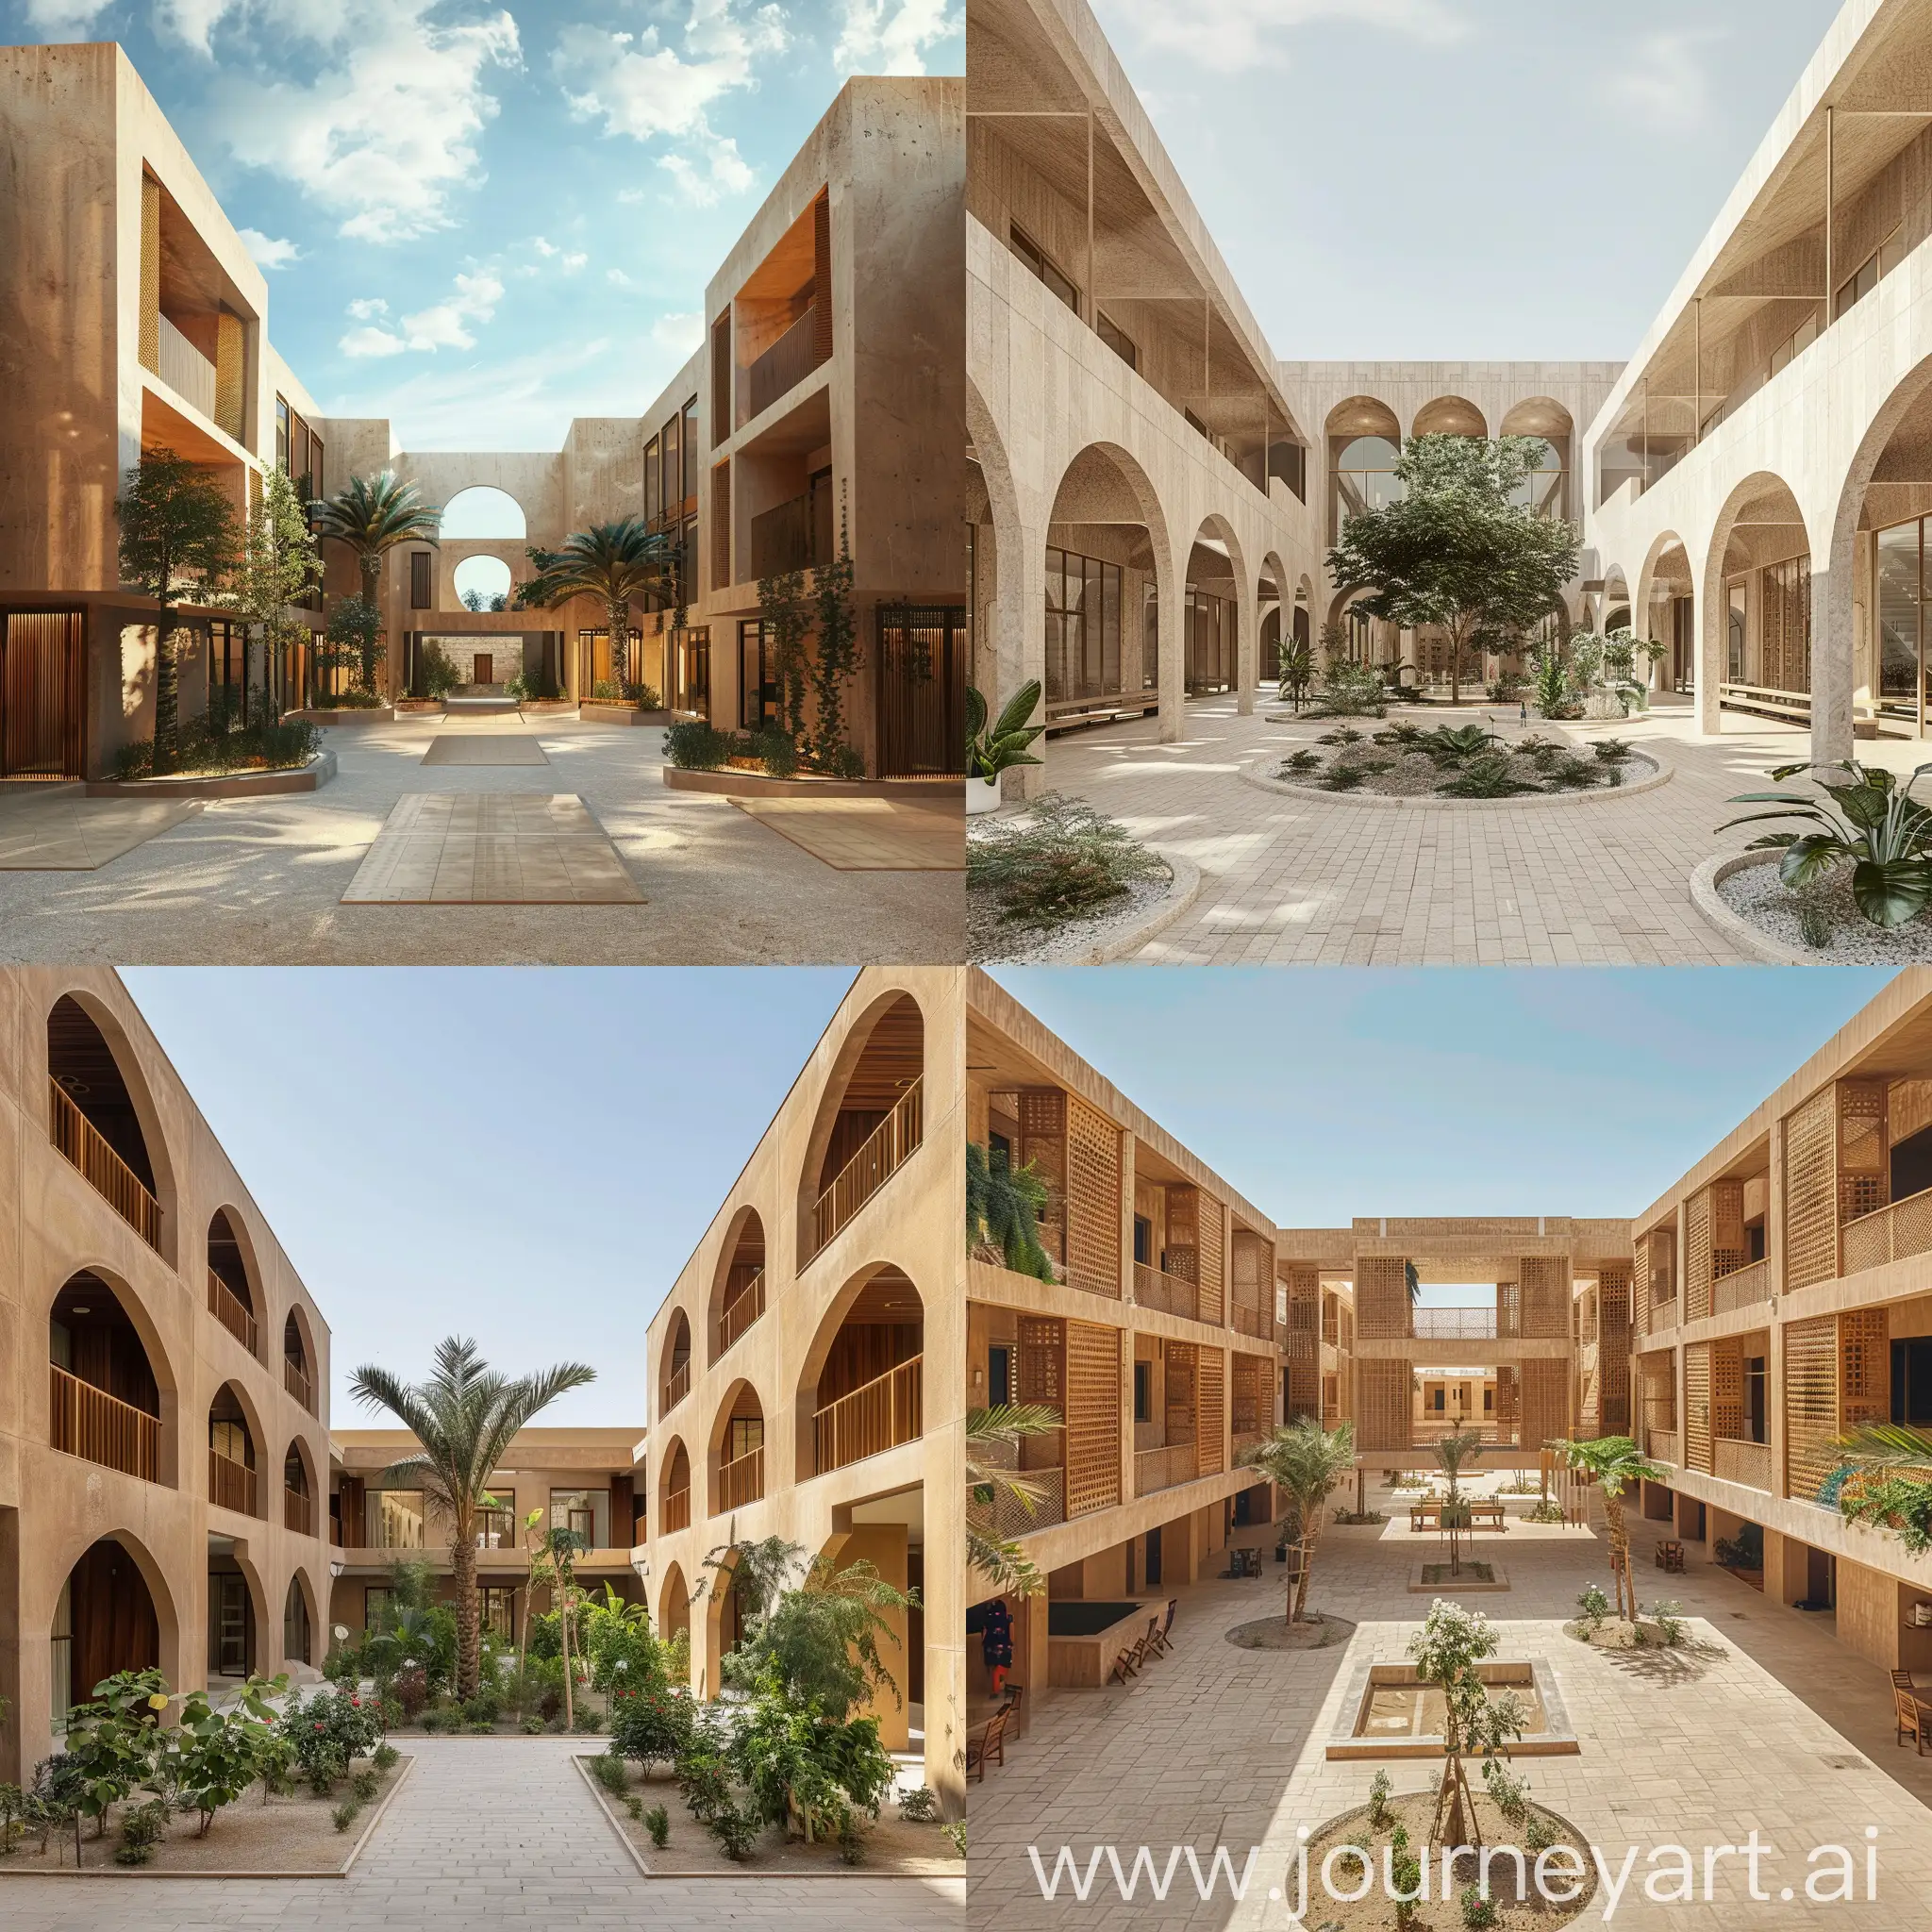 community center in gouna with exterior boho architecture style with court in the middle